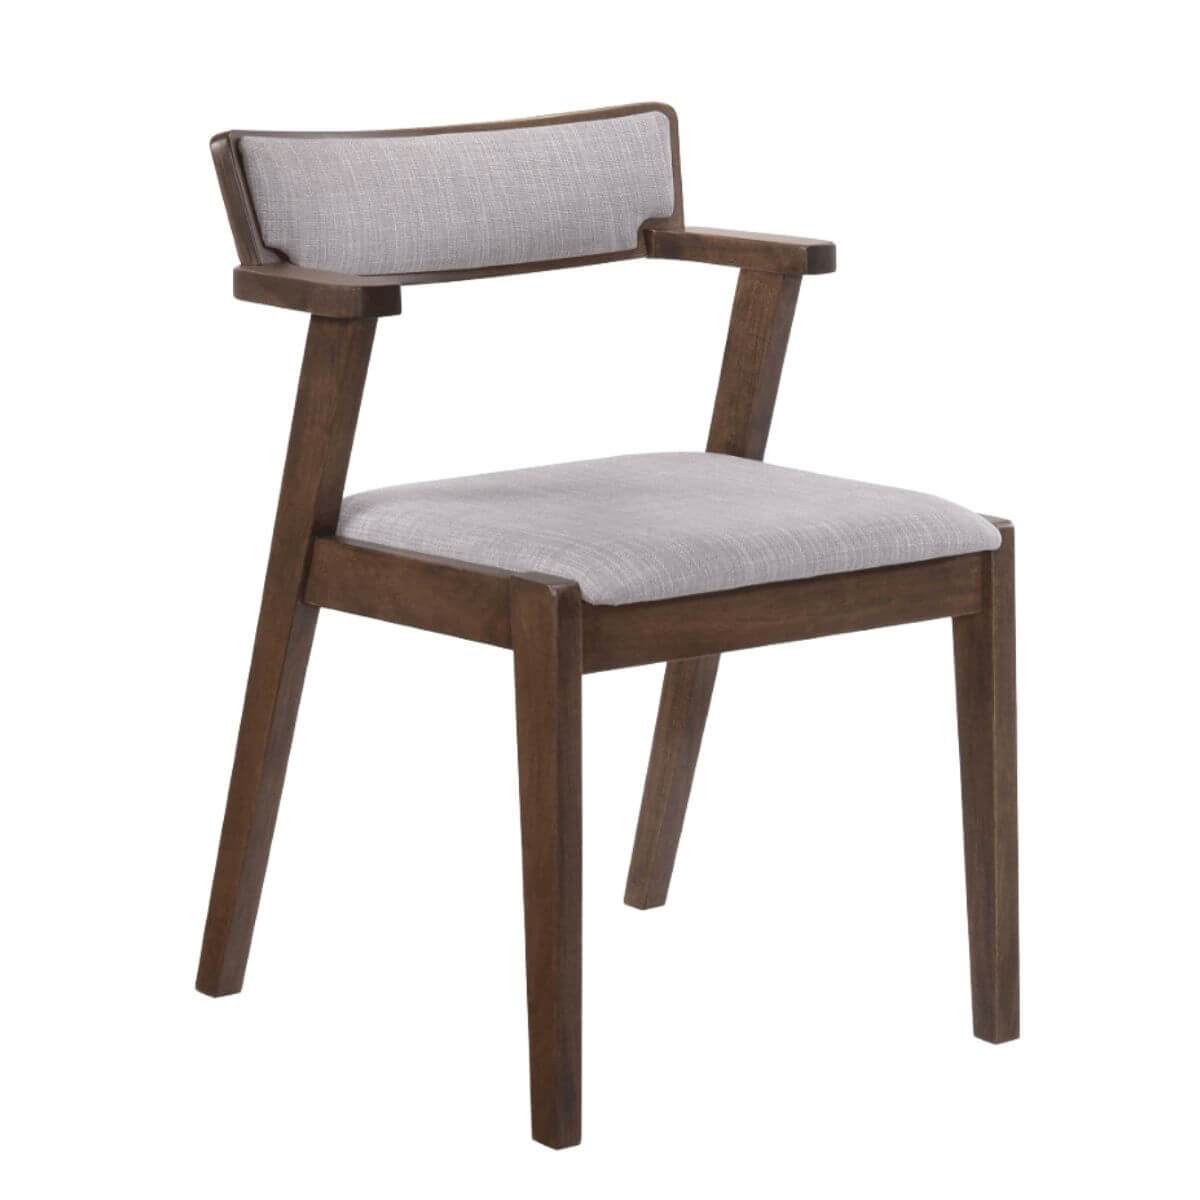 Elsa Dining chair with arm rest in GREY-Upinteriors